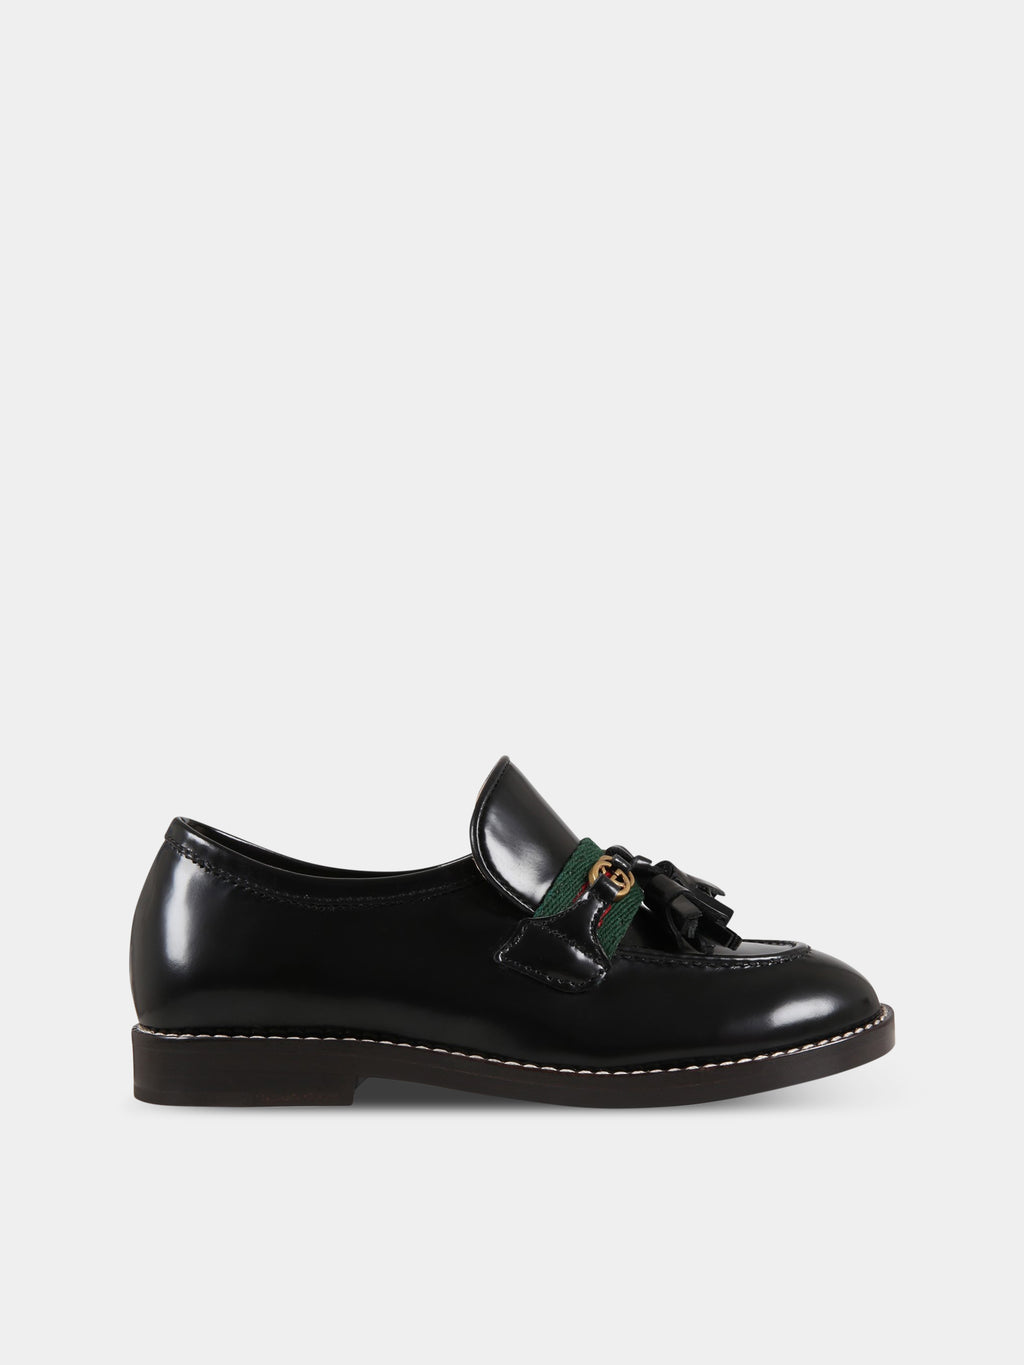 Black loafers for kids with double GG